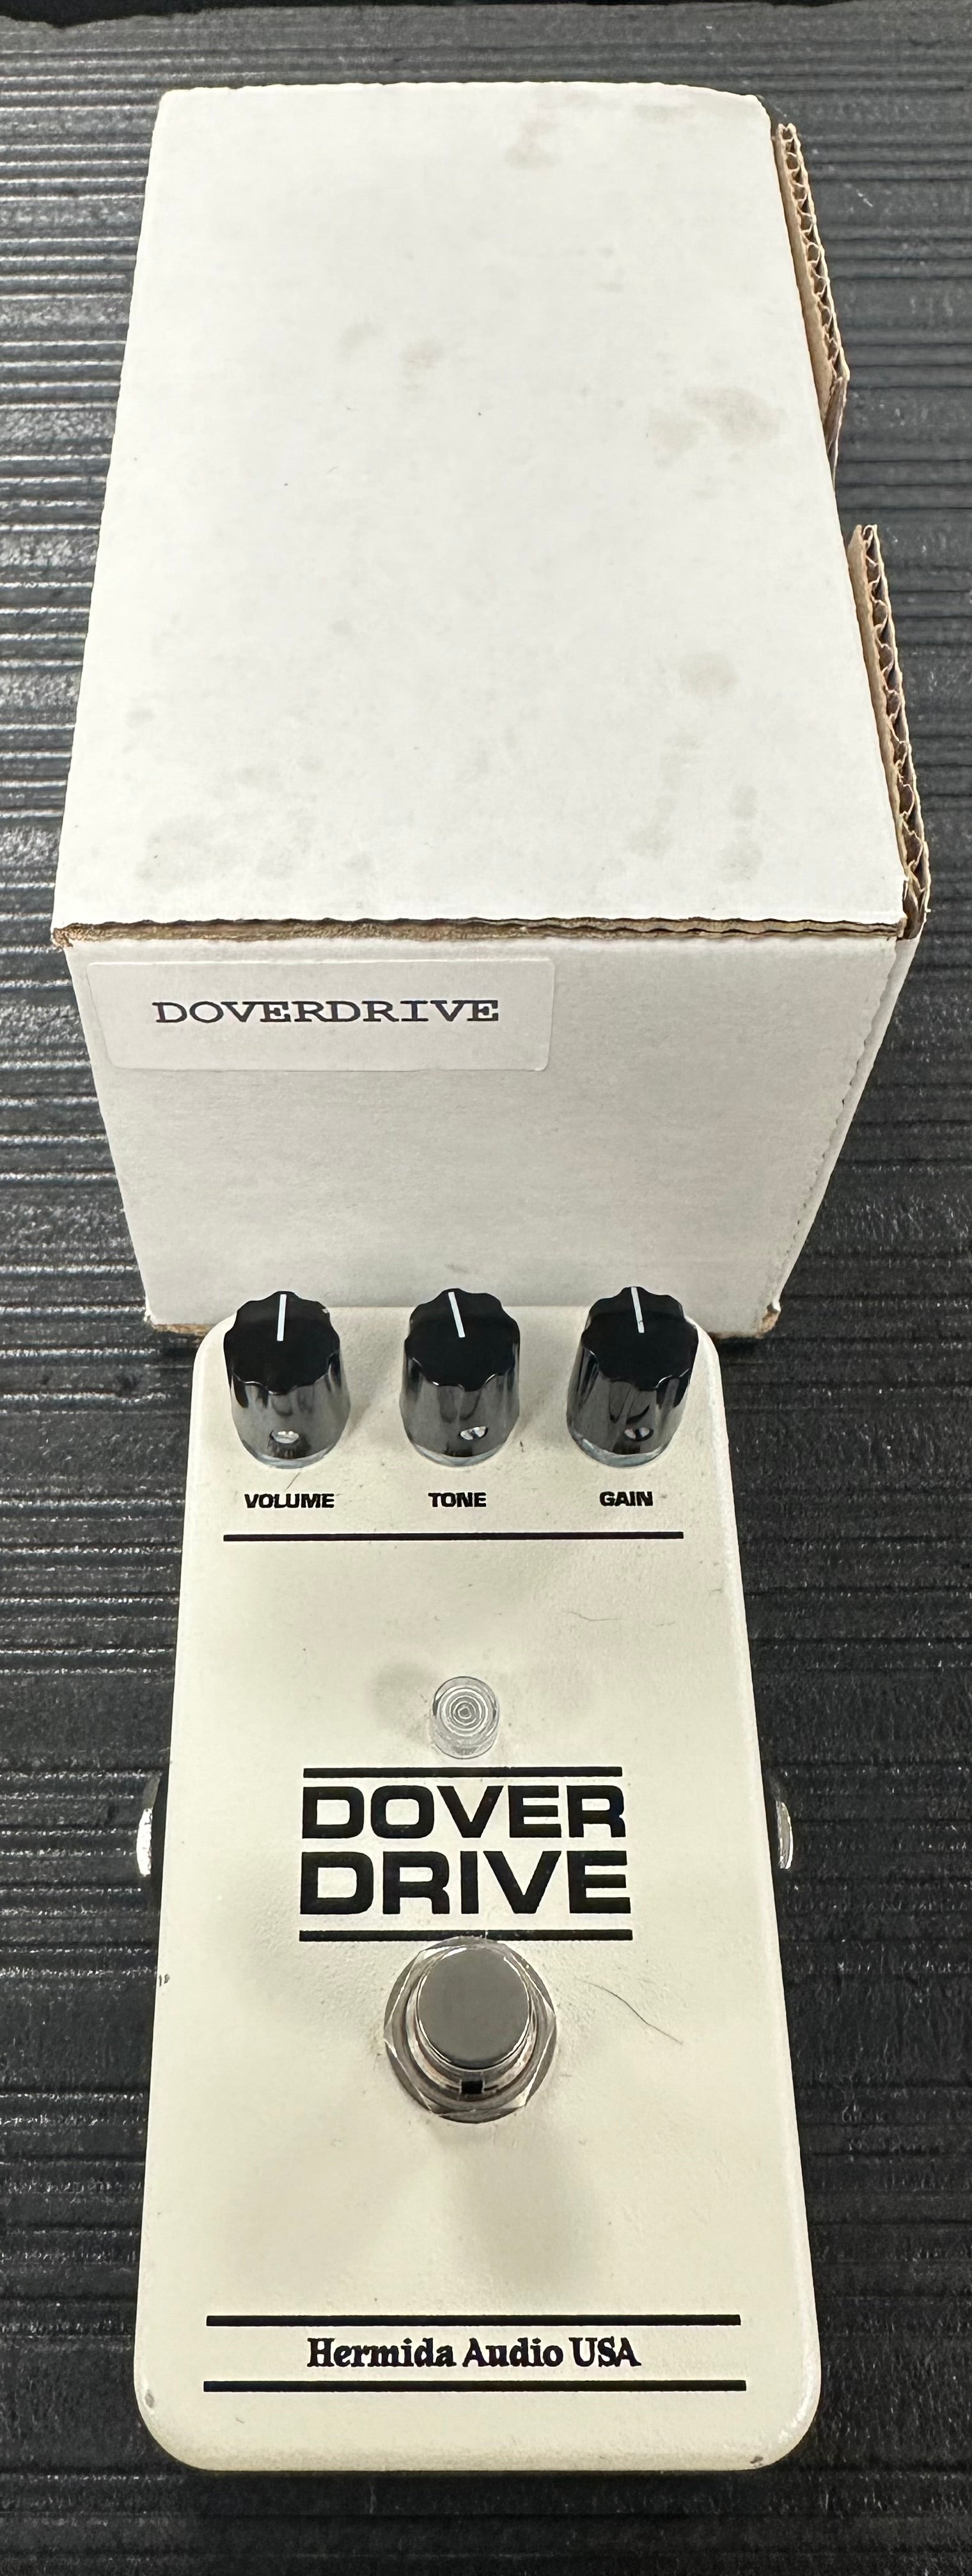 Top with box of Used Hermida Audio Dover Drive Overdrive Pedal w/box TSS4011